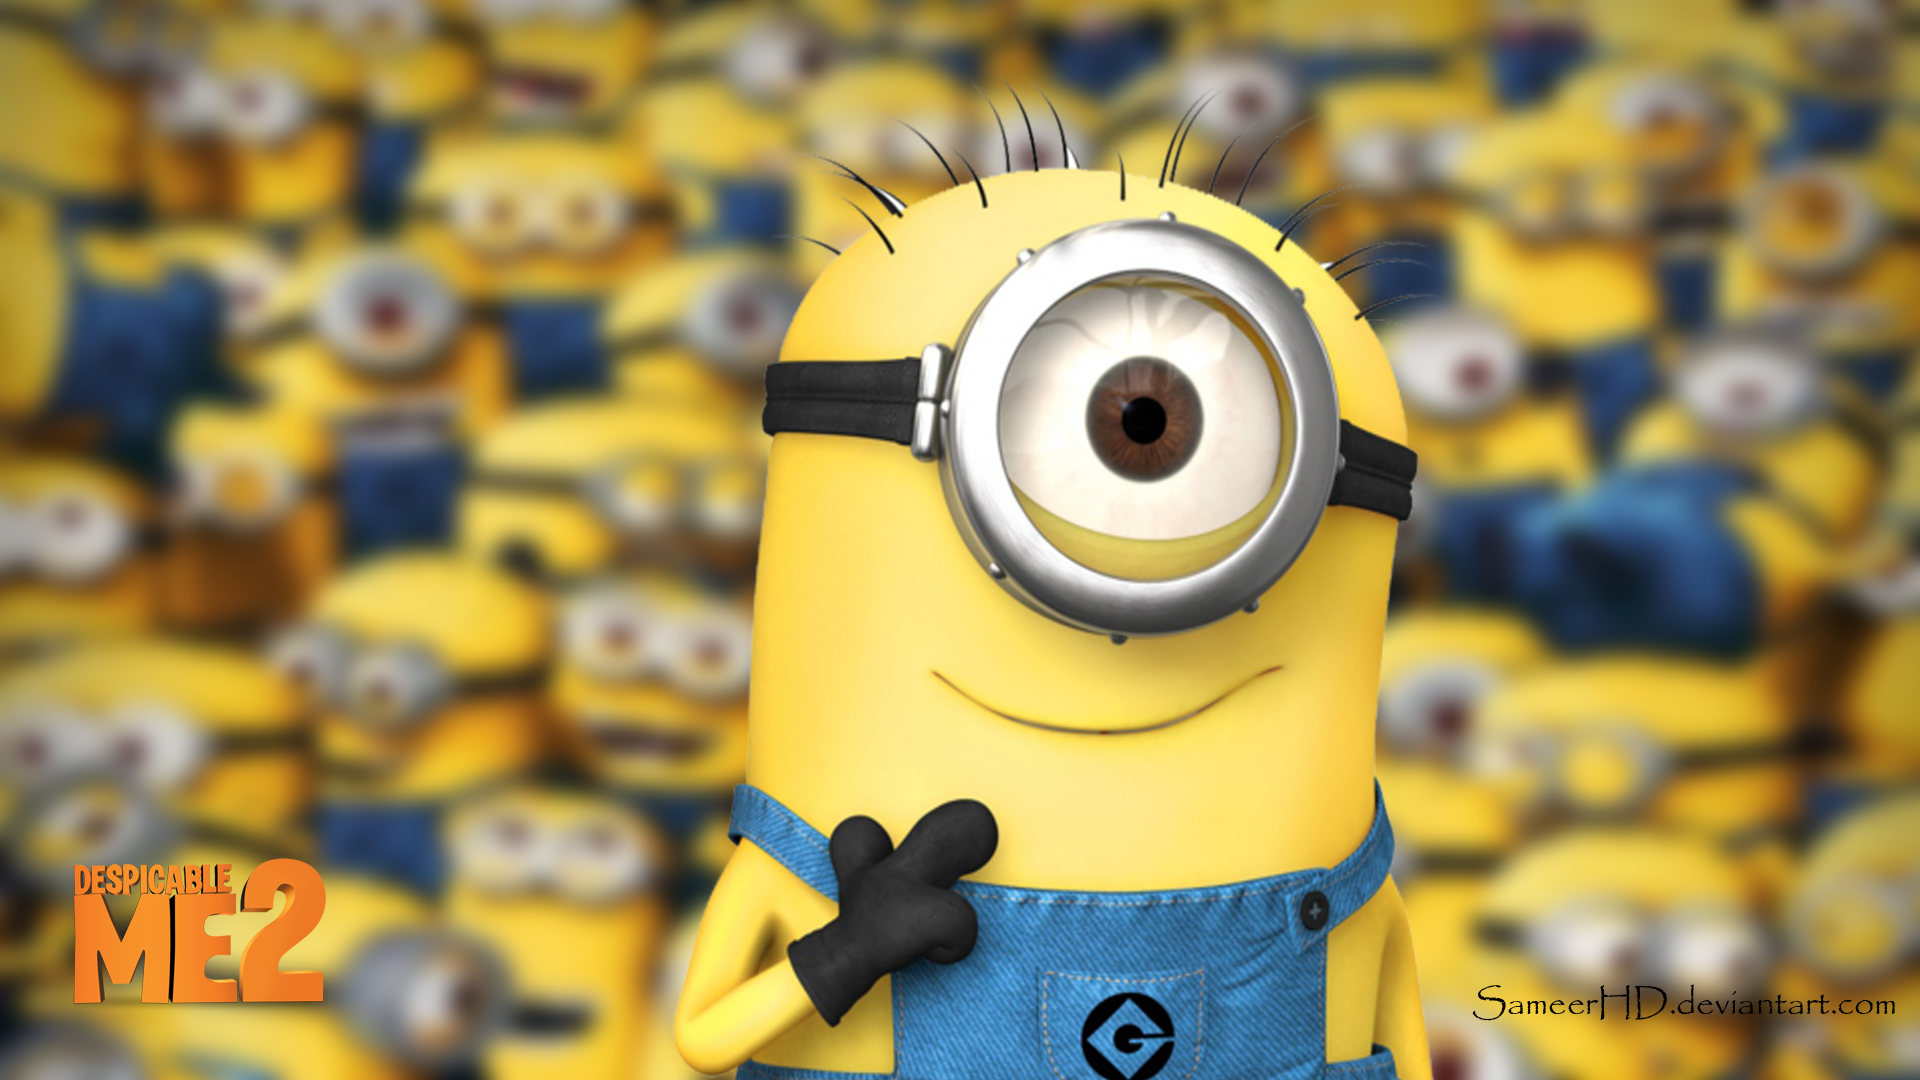 Despicable Me 2 Minion Wallpaper by SameerHD on DeviantArt